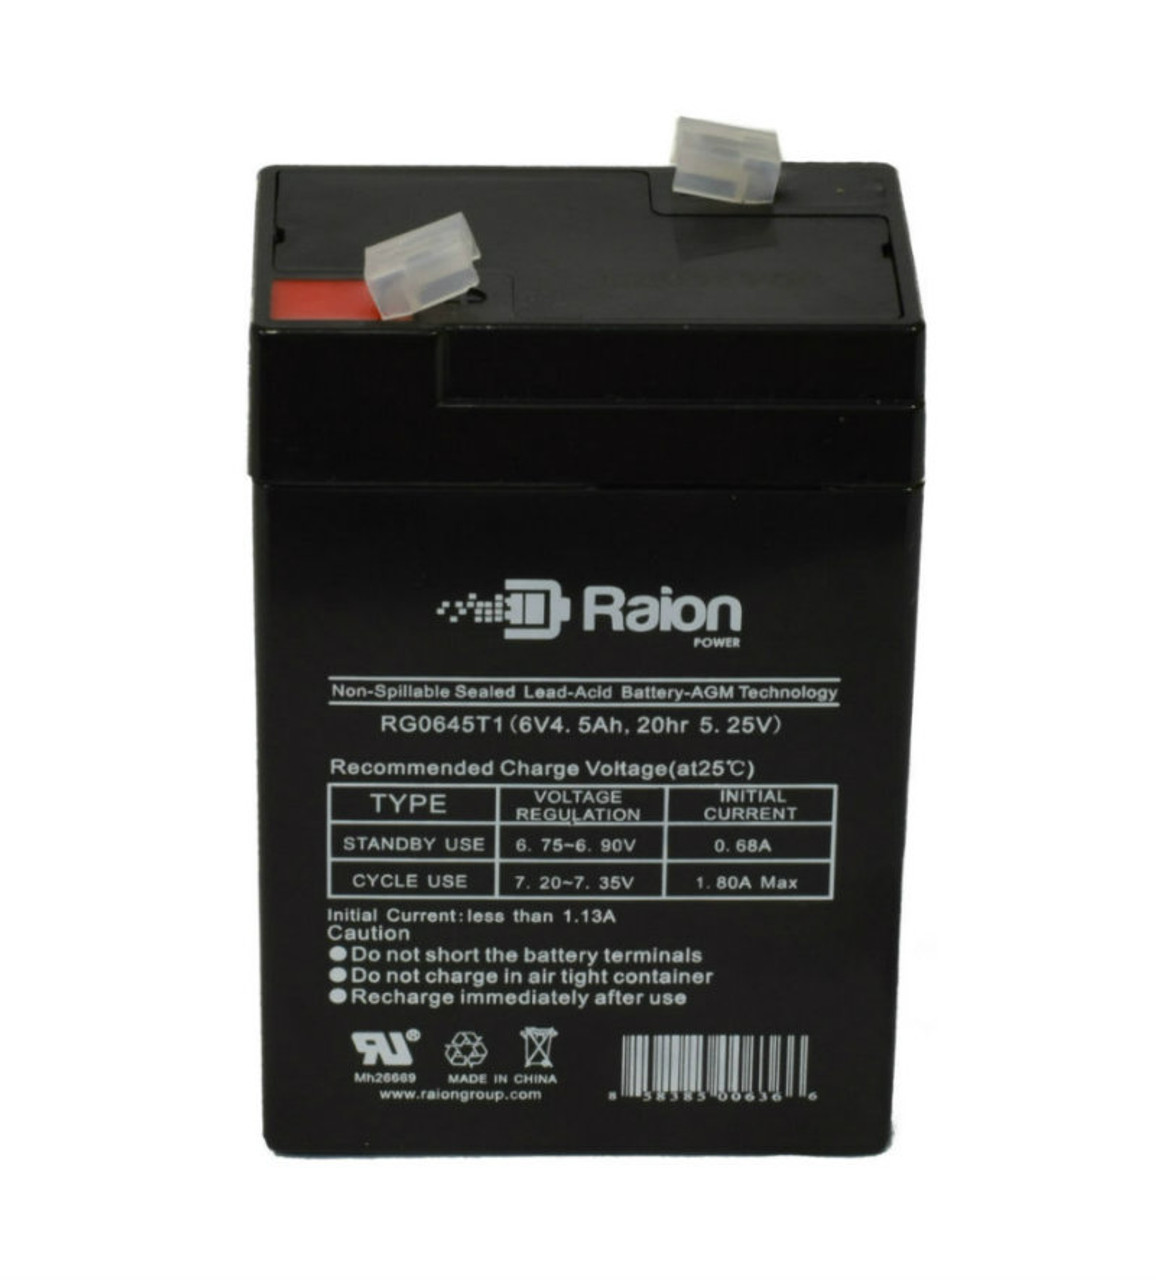 Raion Power RG0645T1 Replacement Battery Cartridge for Chloride 100-001-0145